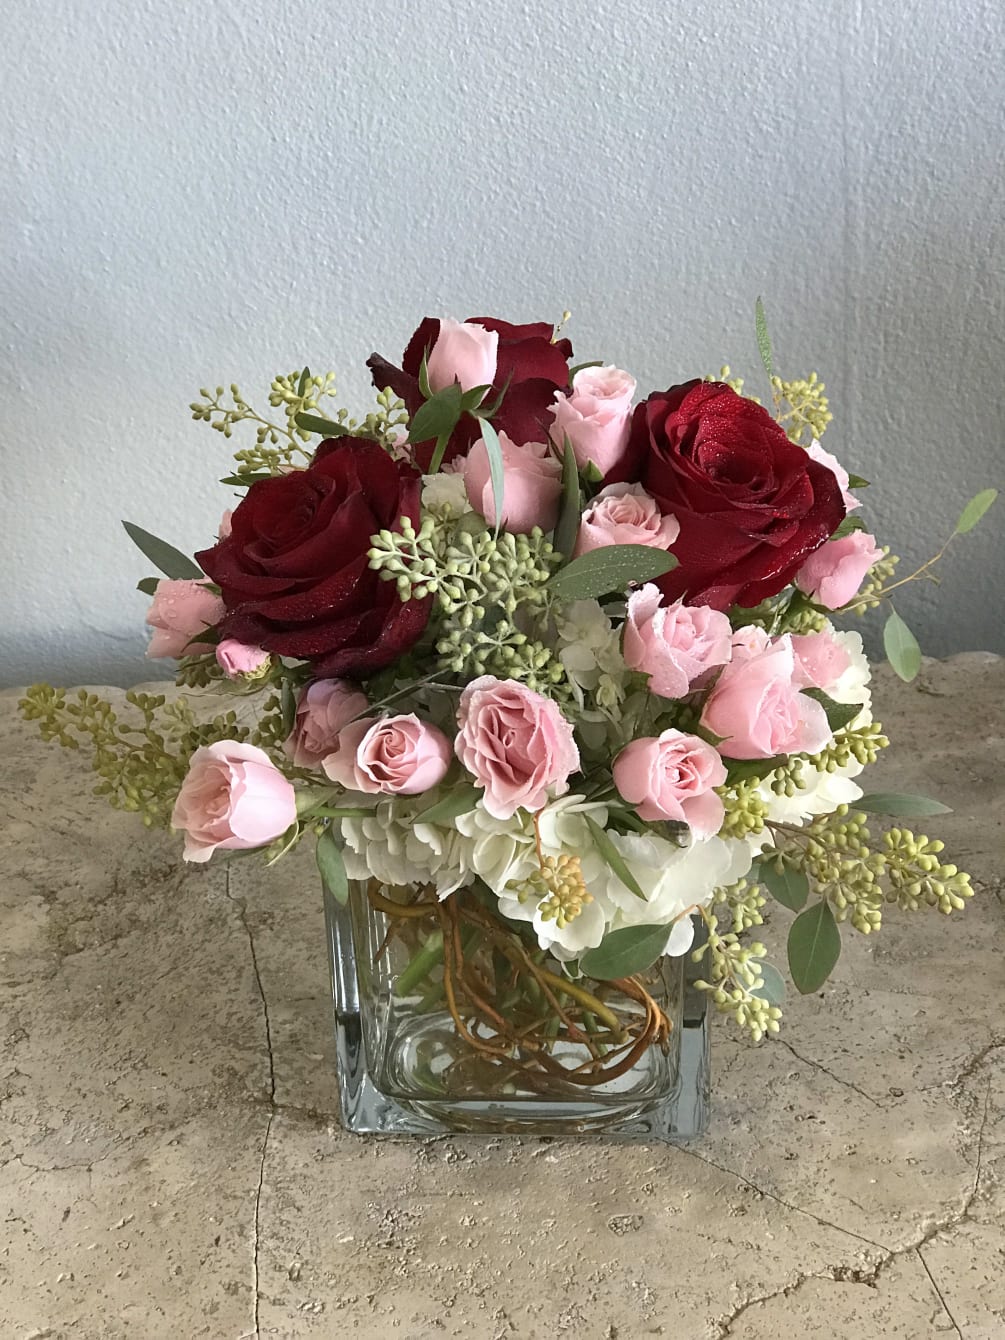 A romantic surprise of red and pink roses mixed with white hydrangeas